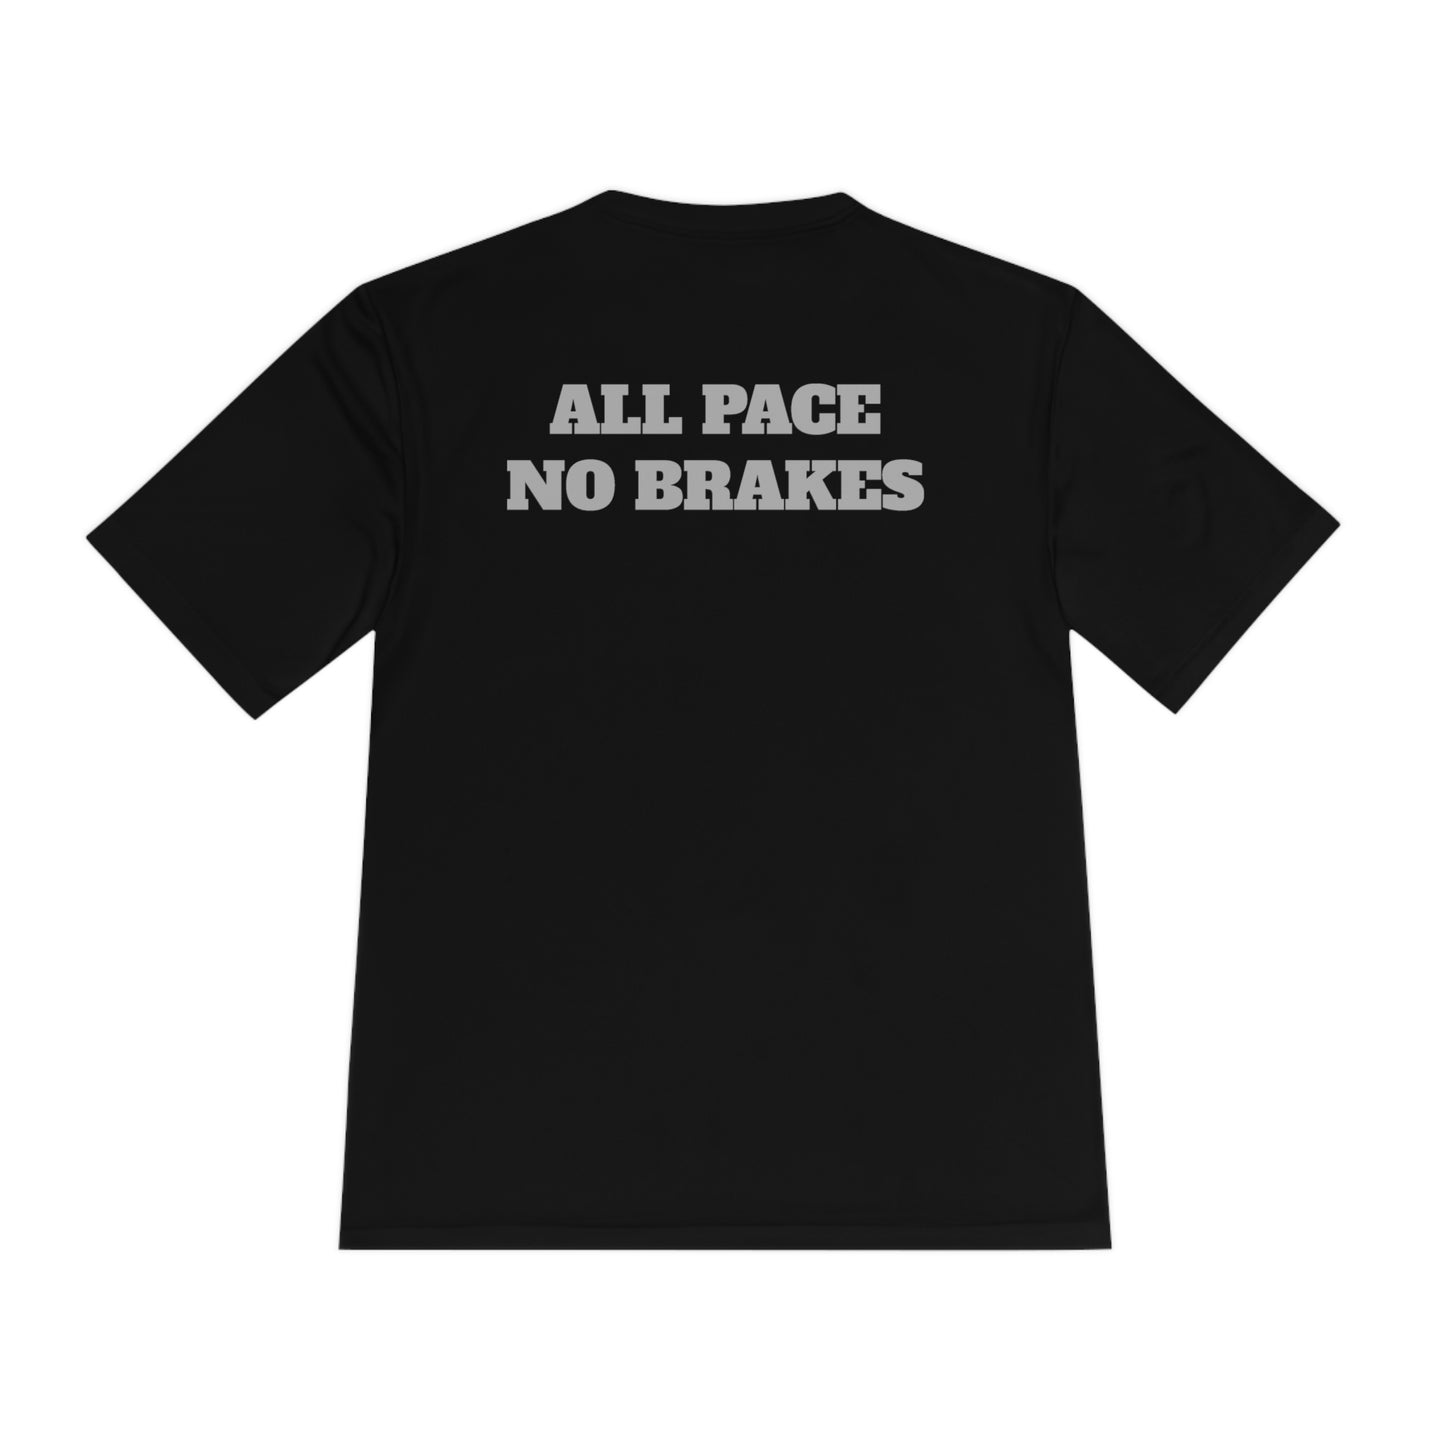 ALL PACE NO BRAKES Athletic T-Shirt (Unisex)